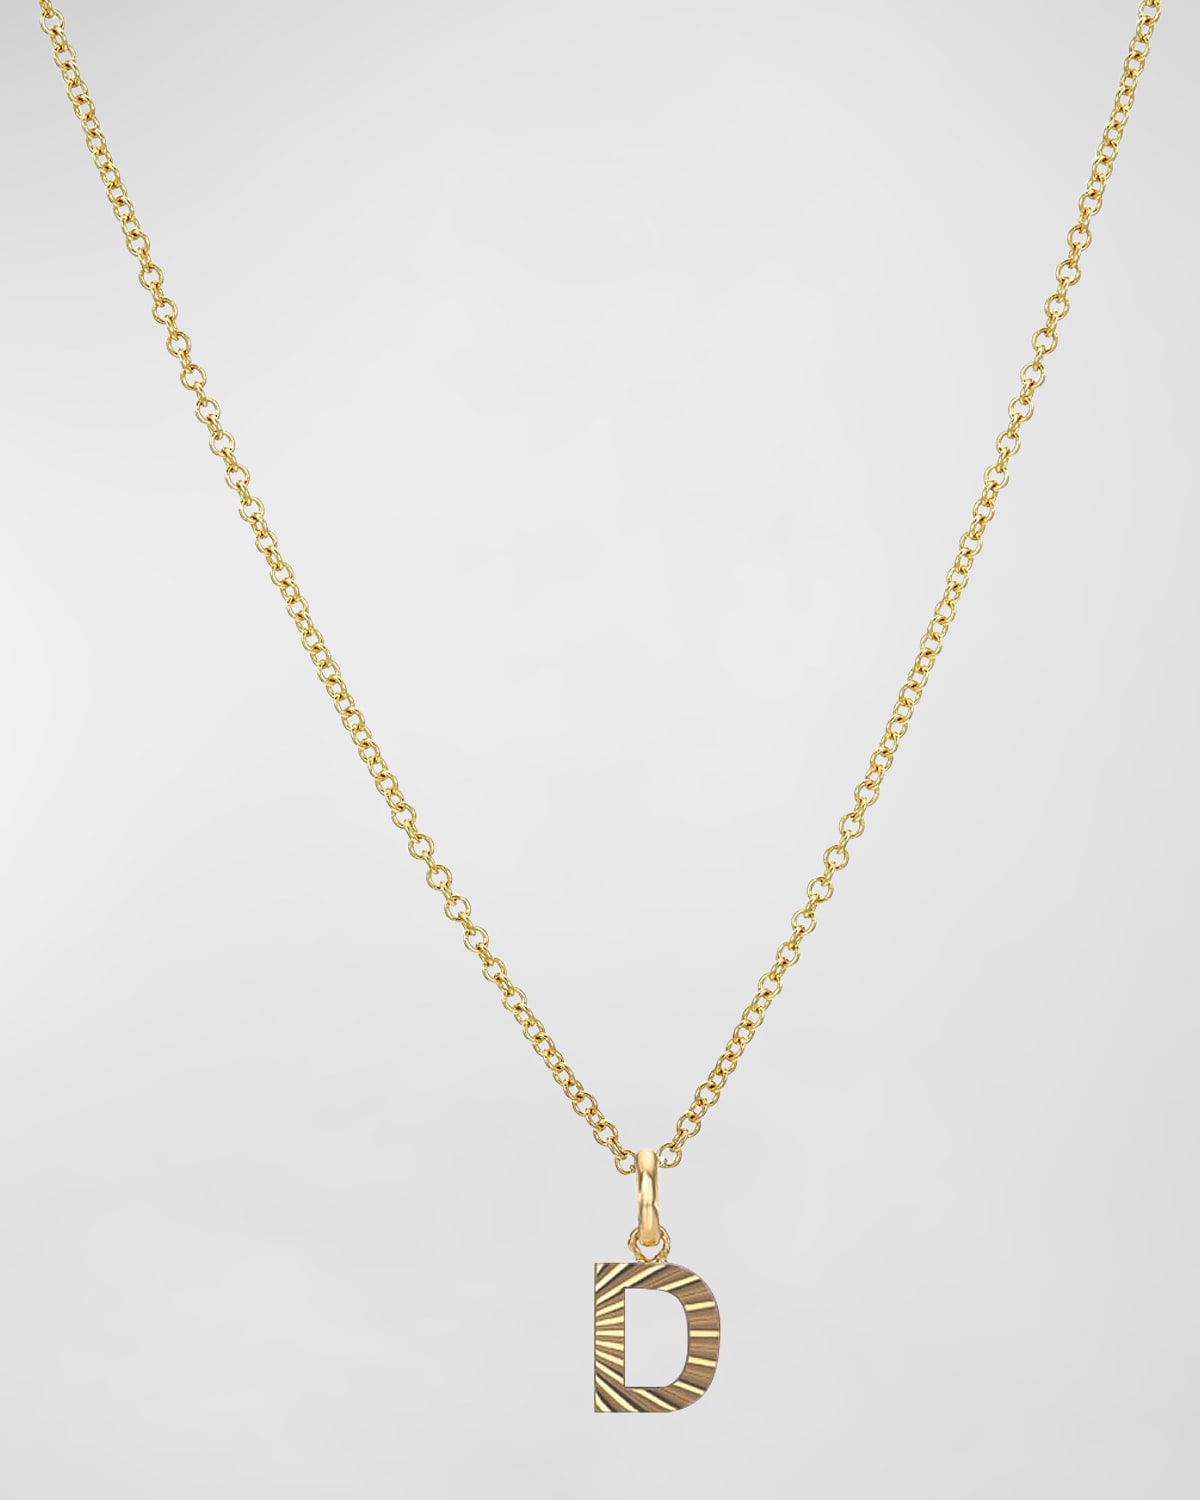 Zoe Lev Jewelry 14k Gold Initial Pendant Necklace In D